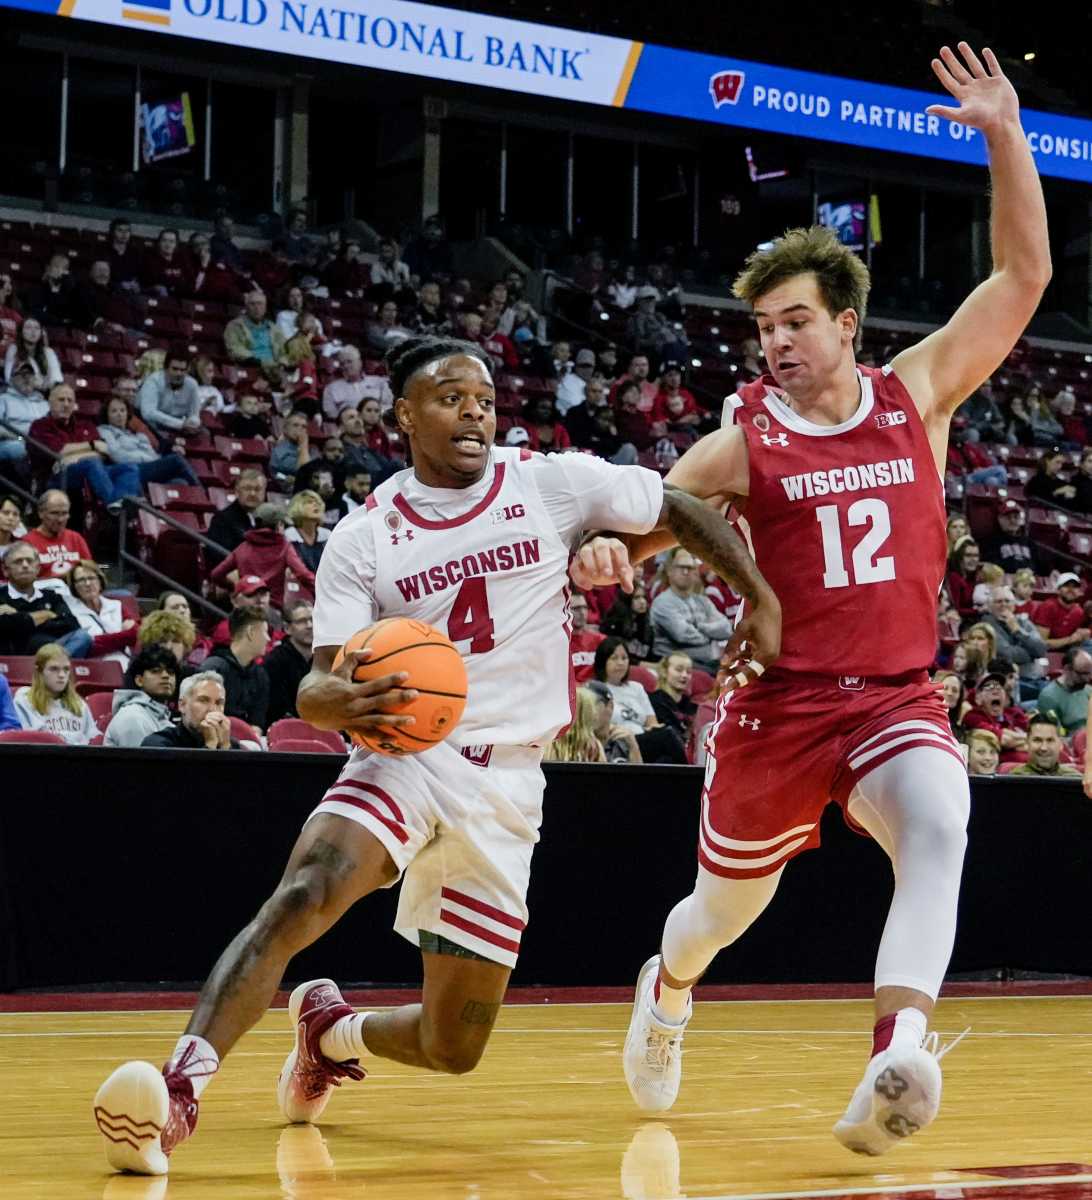 (Left) Wisconsin Badgers guard Kamari McGee (4) breaks through (right) guard Luke Heartle (12) defense during the second half of the Red & White scrimmage on Sunday October 09, 2022 at the Kohl Center in Madison, Wis. Mjs 221009 Uwmen10 P14 115157658